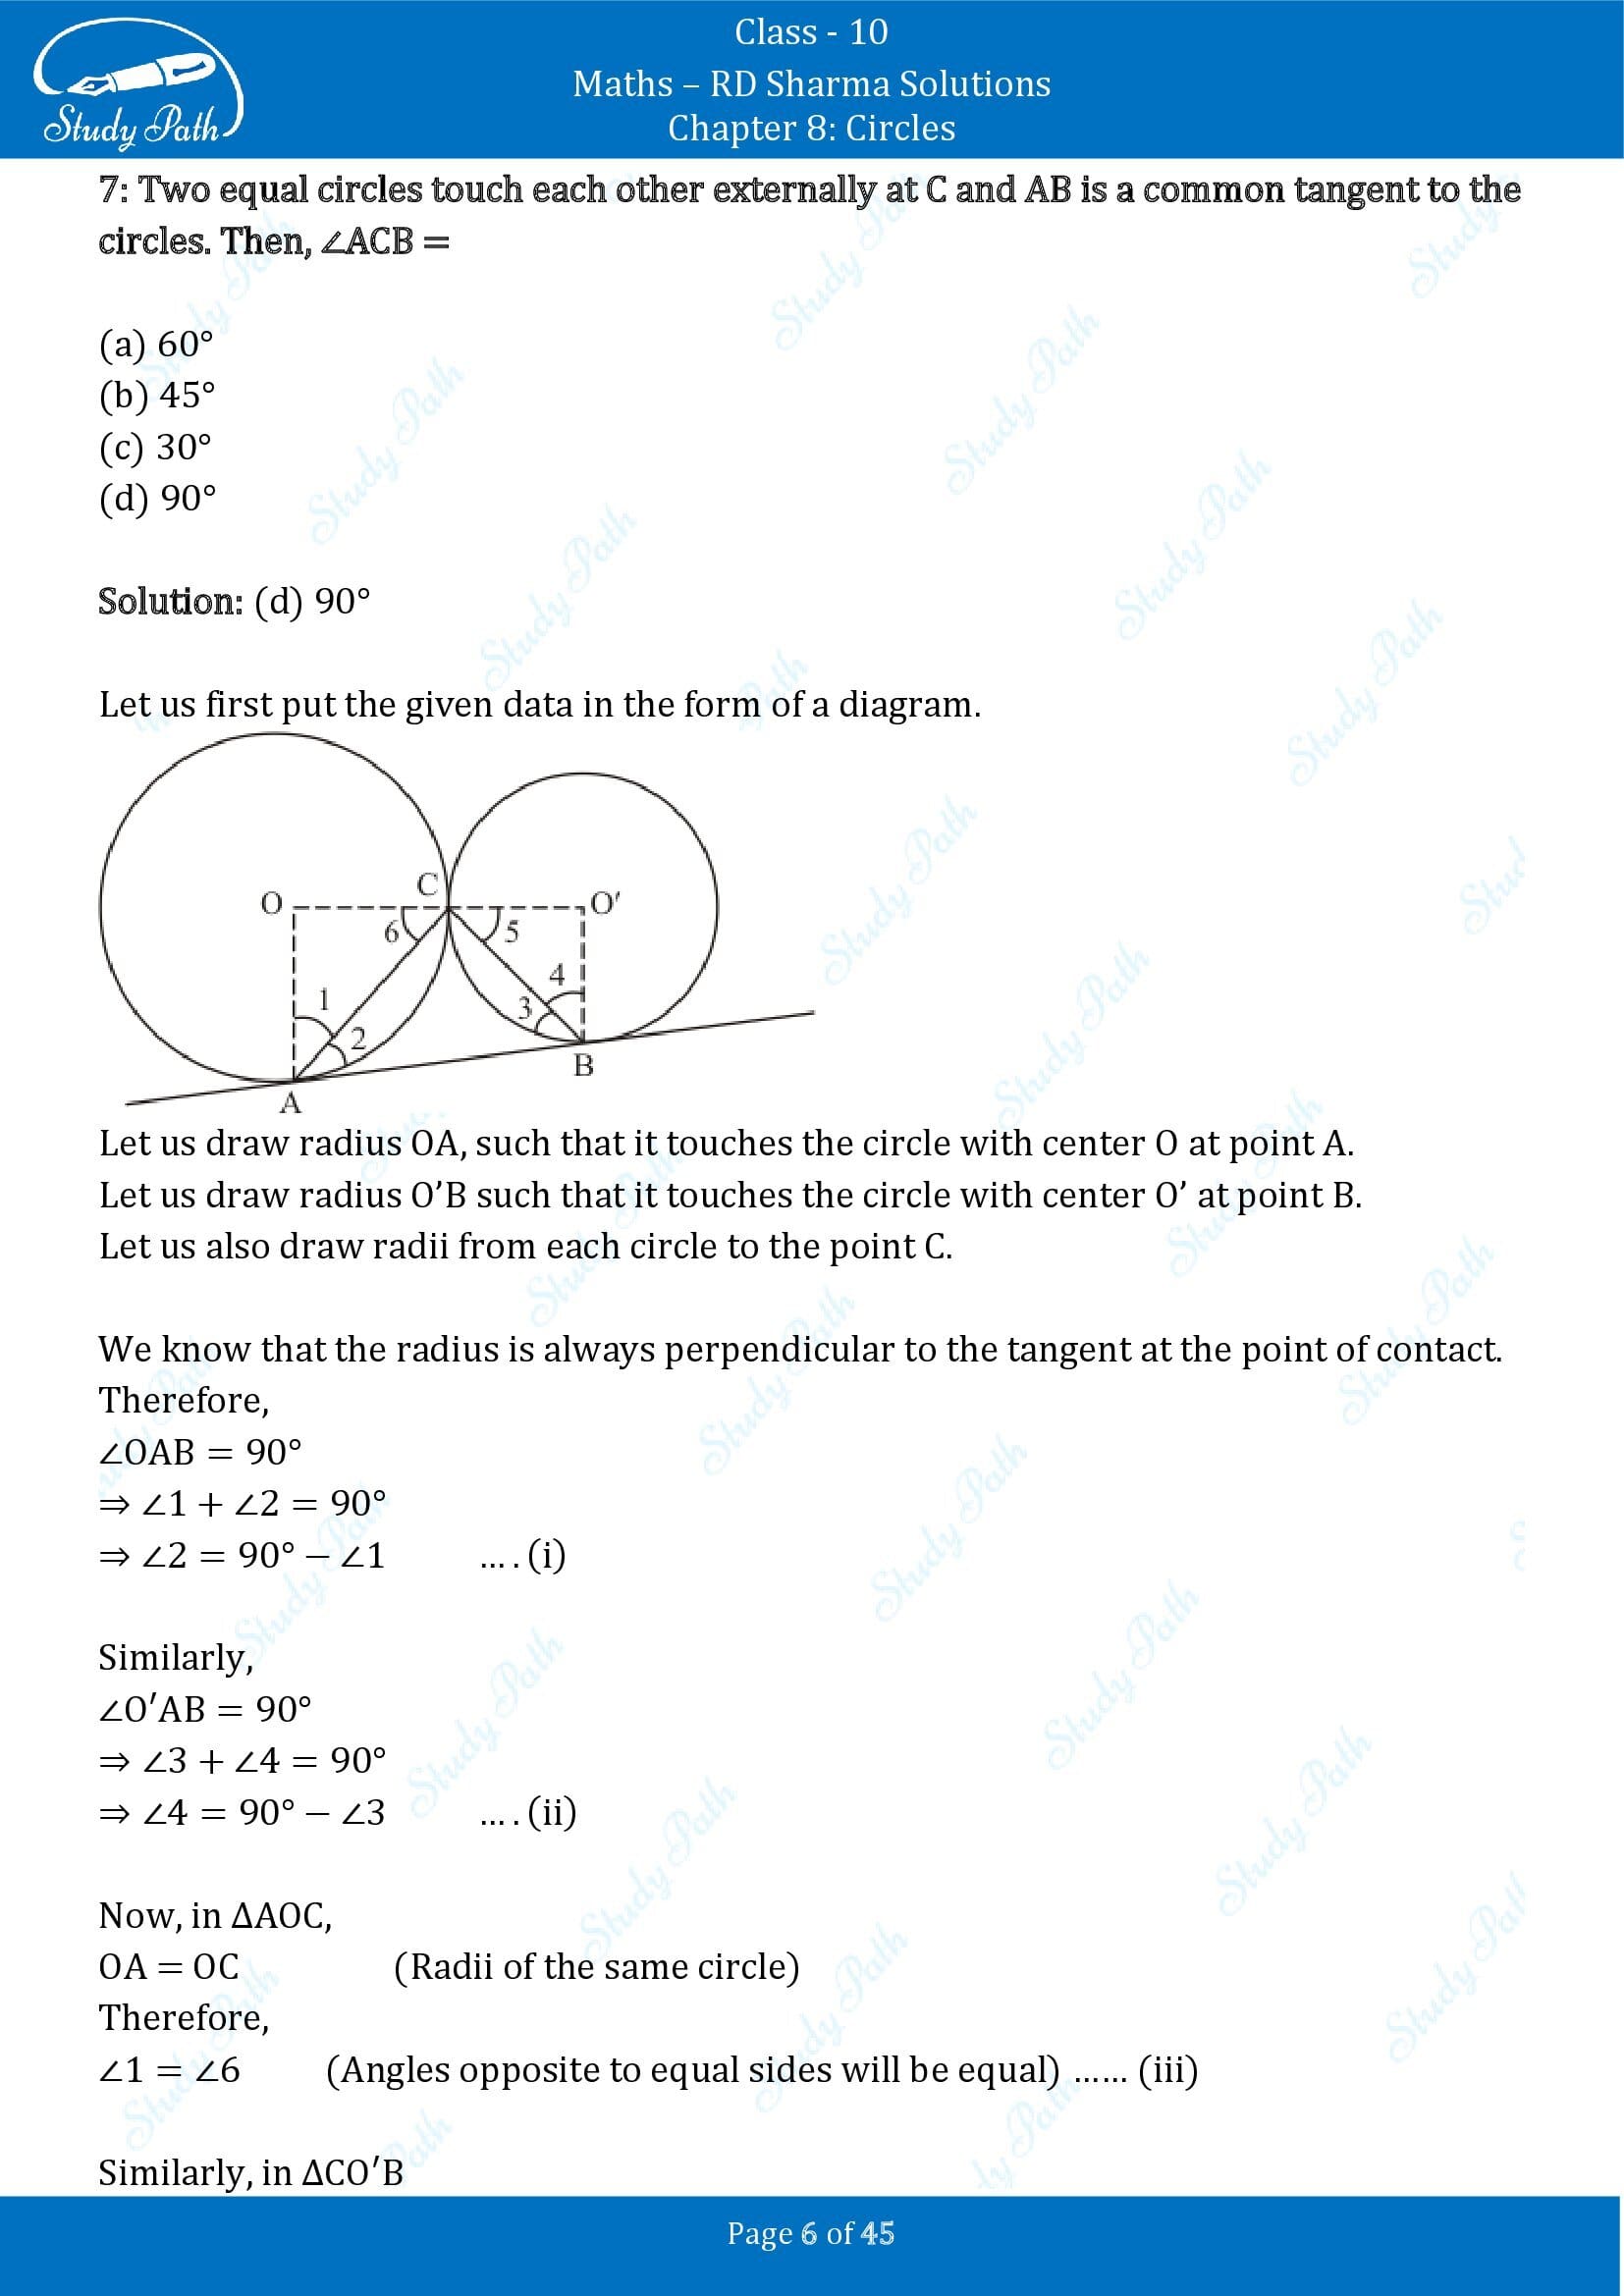 RD Sharma Solutions Class 10 Chapter 8 Circles Multiple Choice Questions MCQs 00006